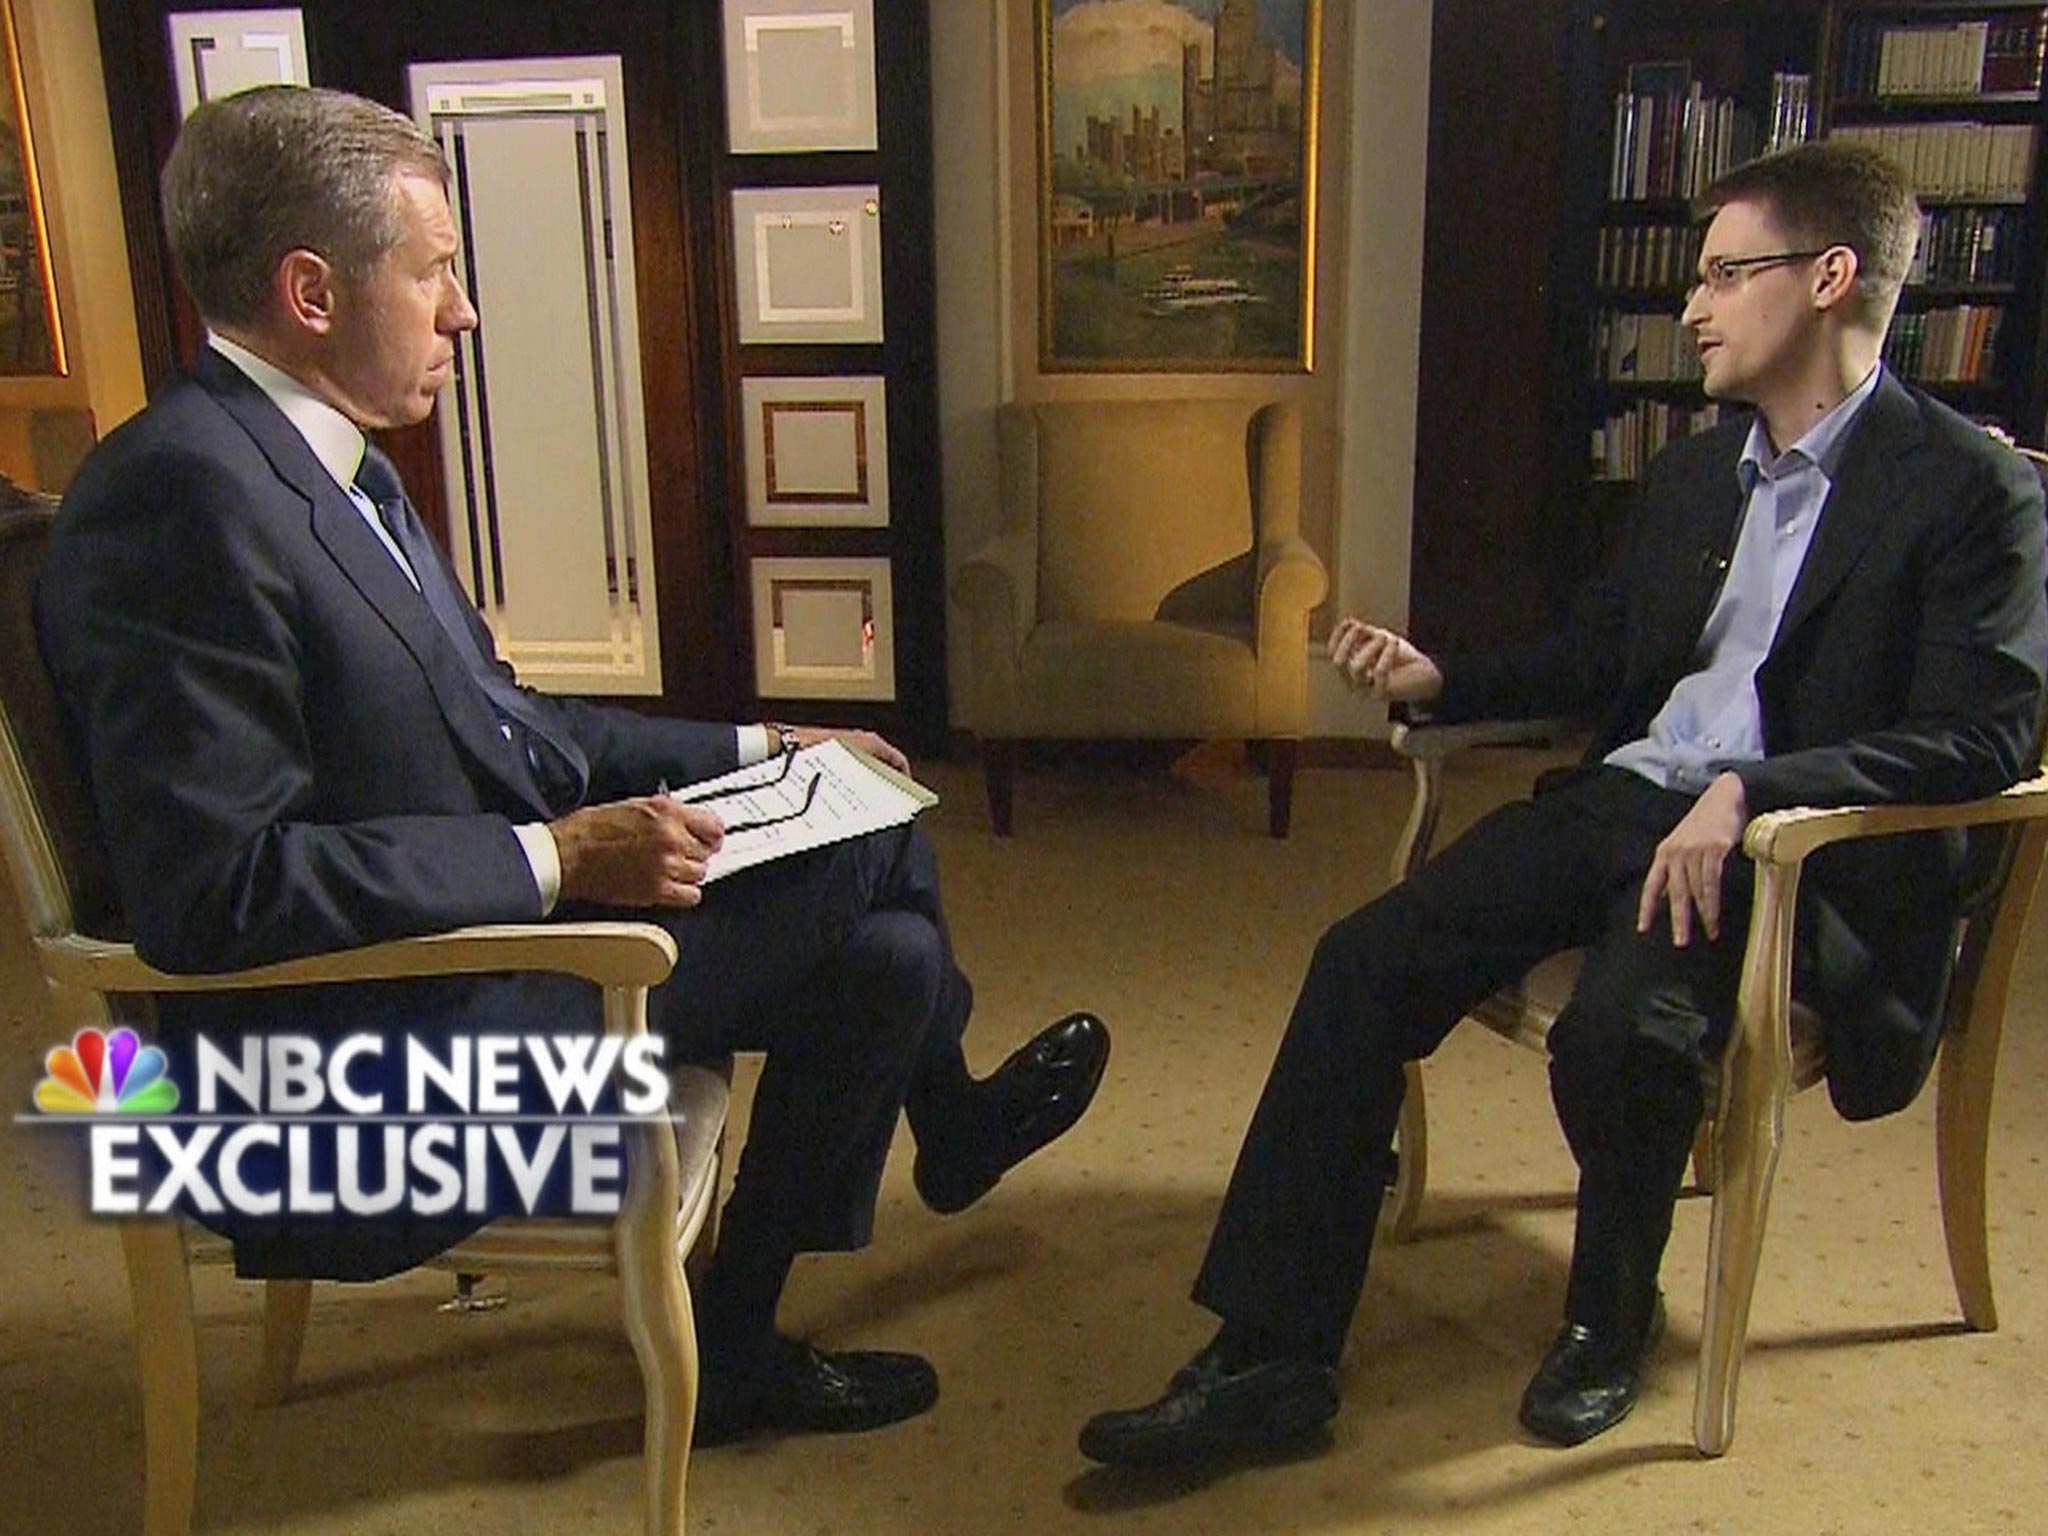 In an interview in Moscow with Brian Williams (left) for NBC News, former US defence contractor Edward Snowden (right) said he had warned the NSA of his concerns but was ignored